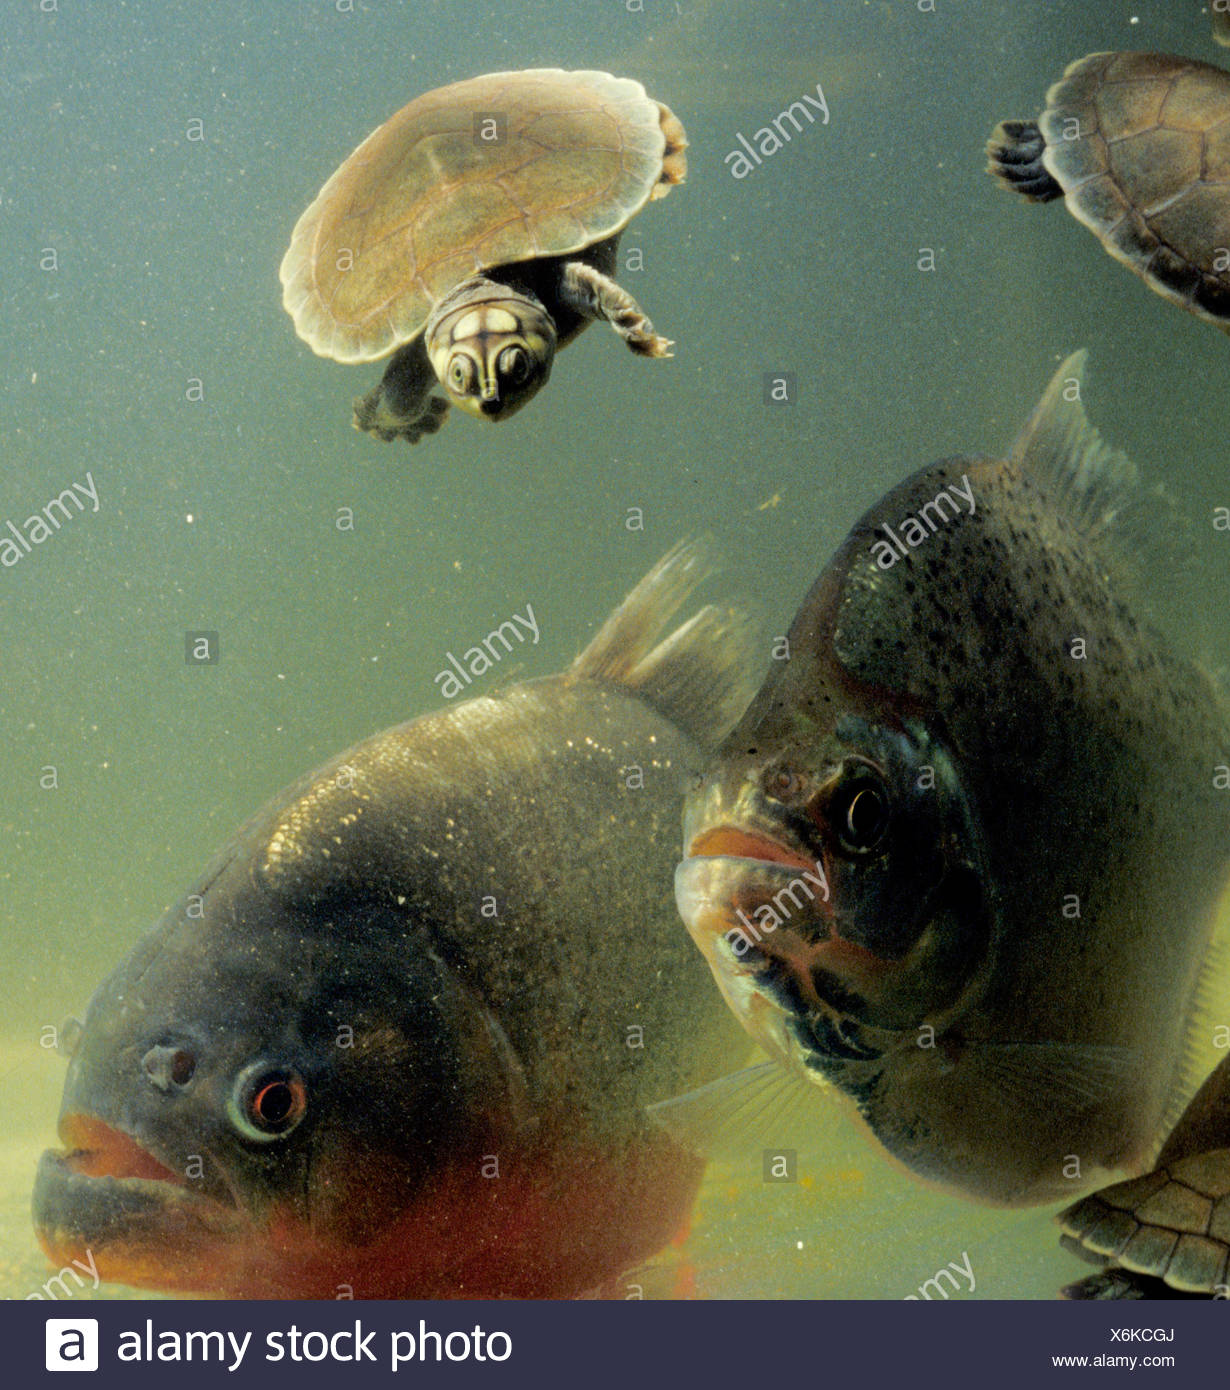  Piranha  Attack  High Resolution Stock Photography and 